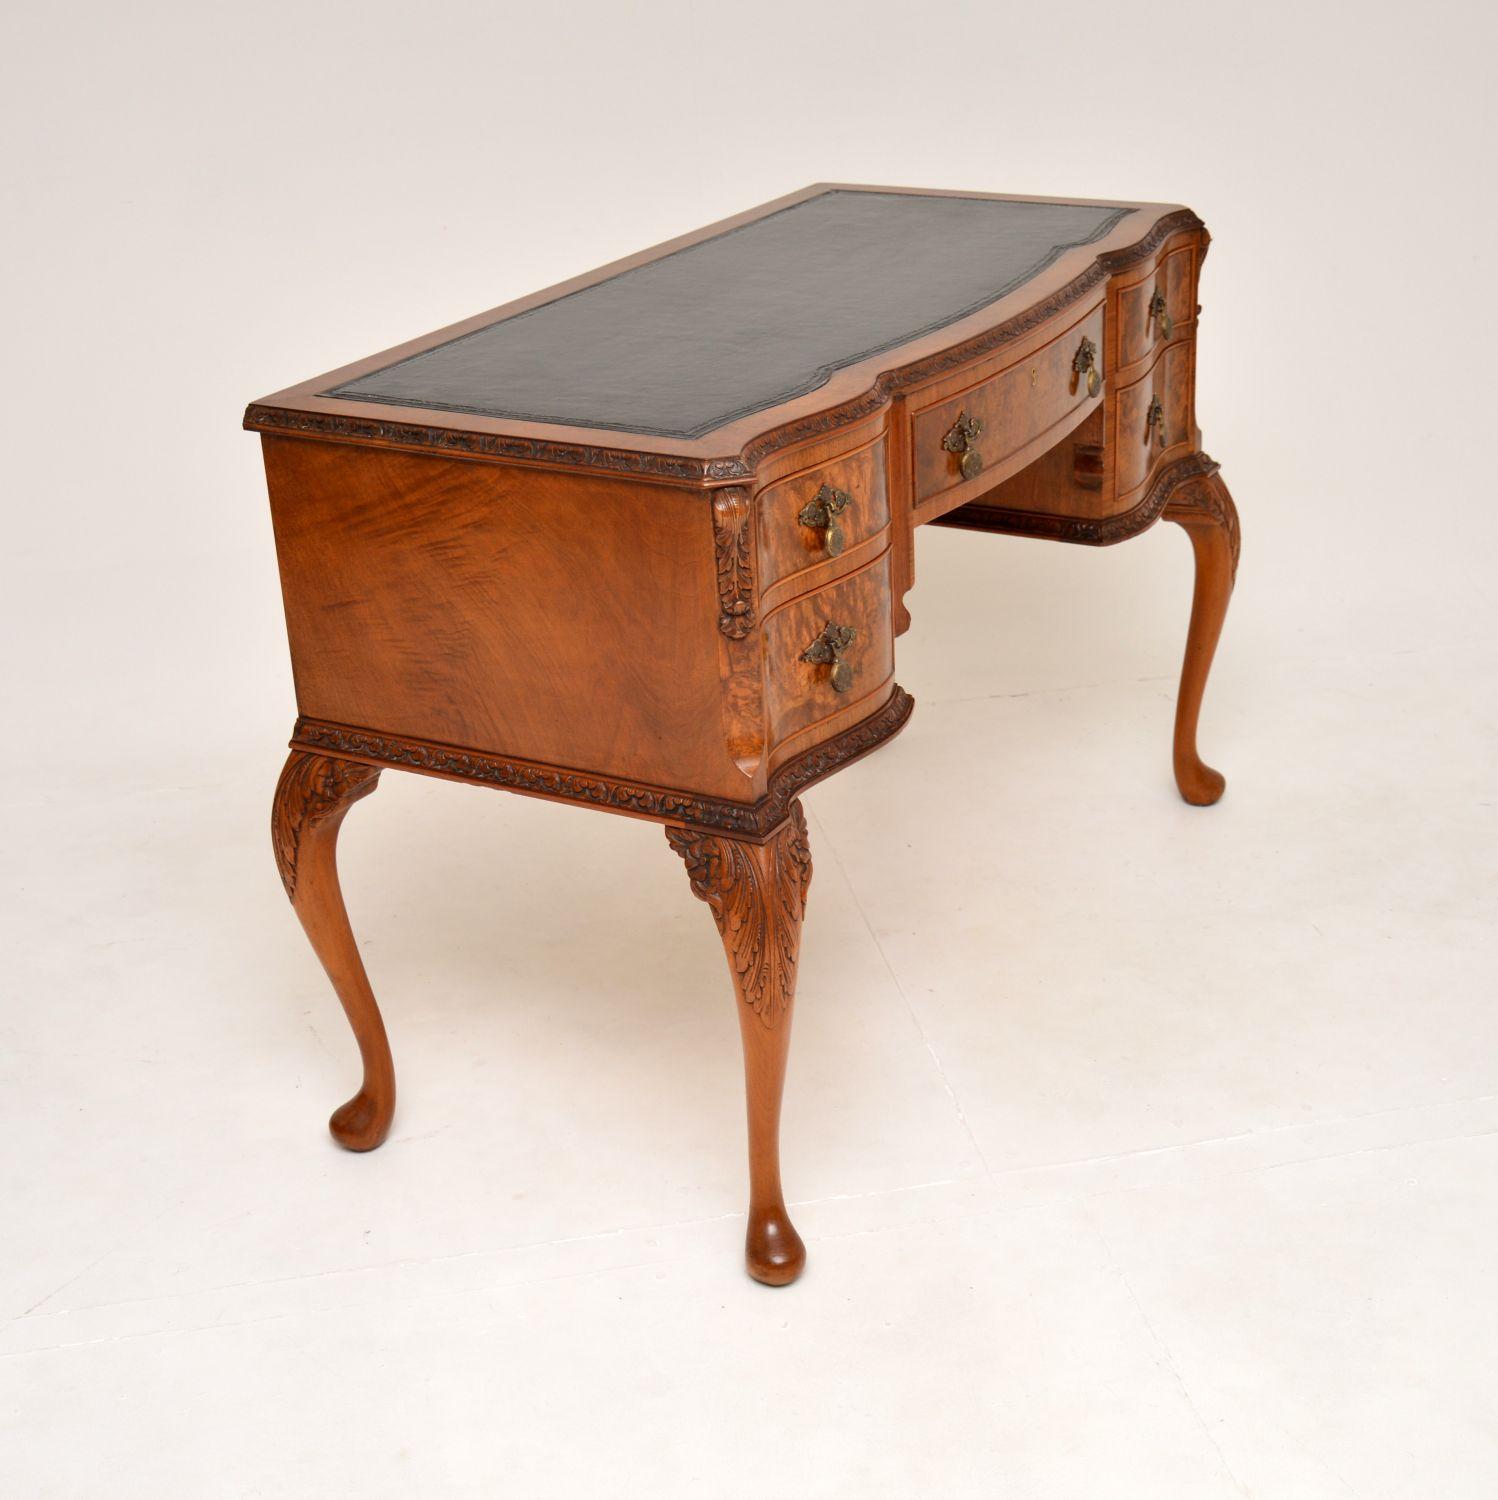 A stunning antique burr walnut leather top writing desk in the Queen Anne style. This was made in England, it dates from the 1920’s.

It is of superb quality, with beautiful and intricate carving all over the edges and base. This sits on cabriole